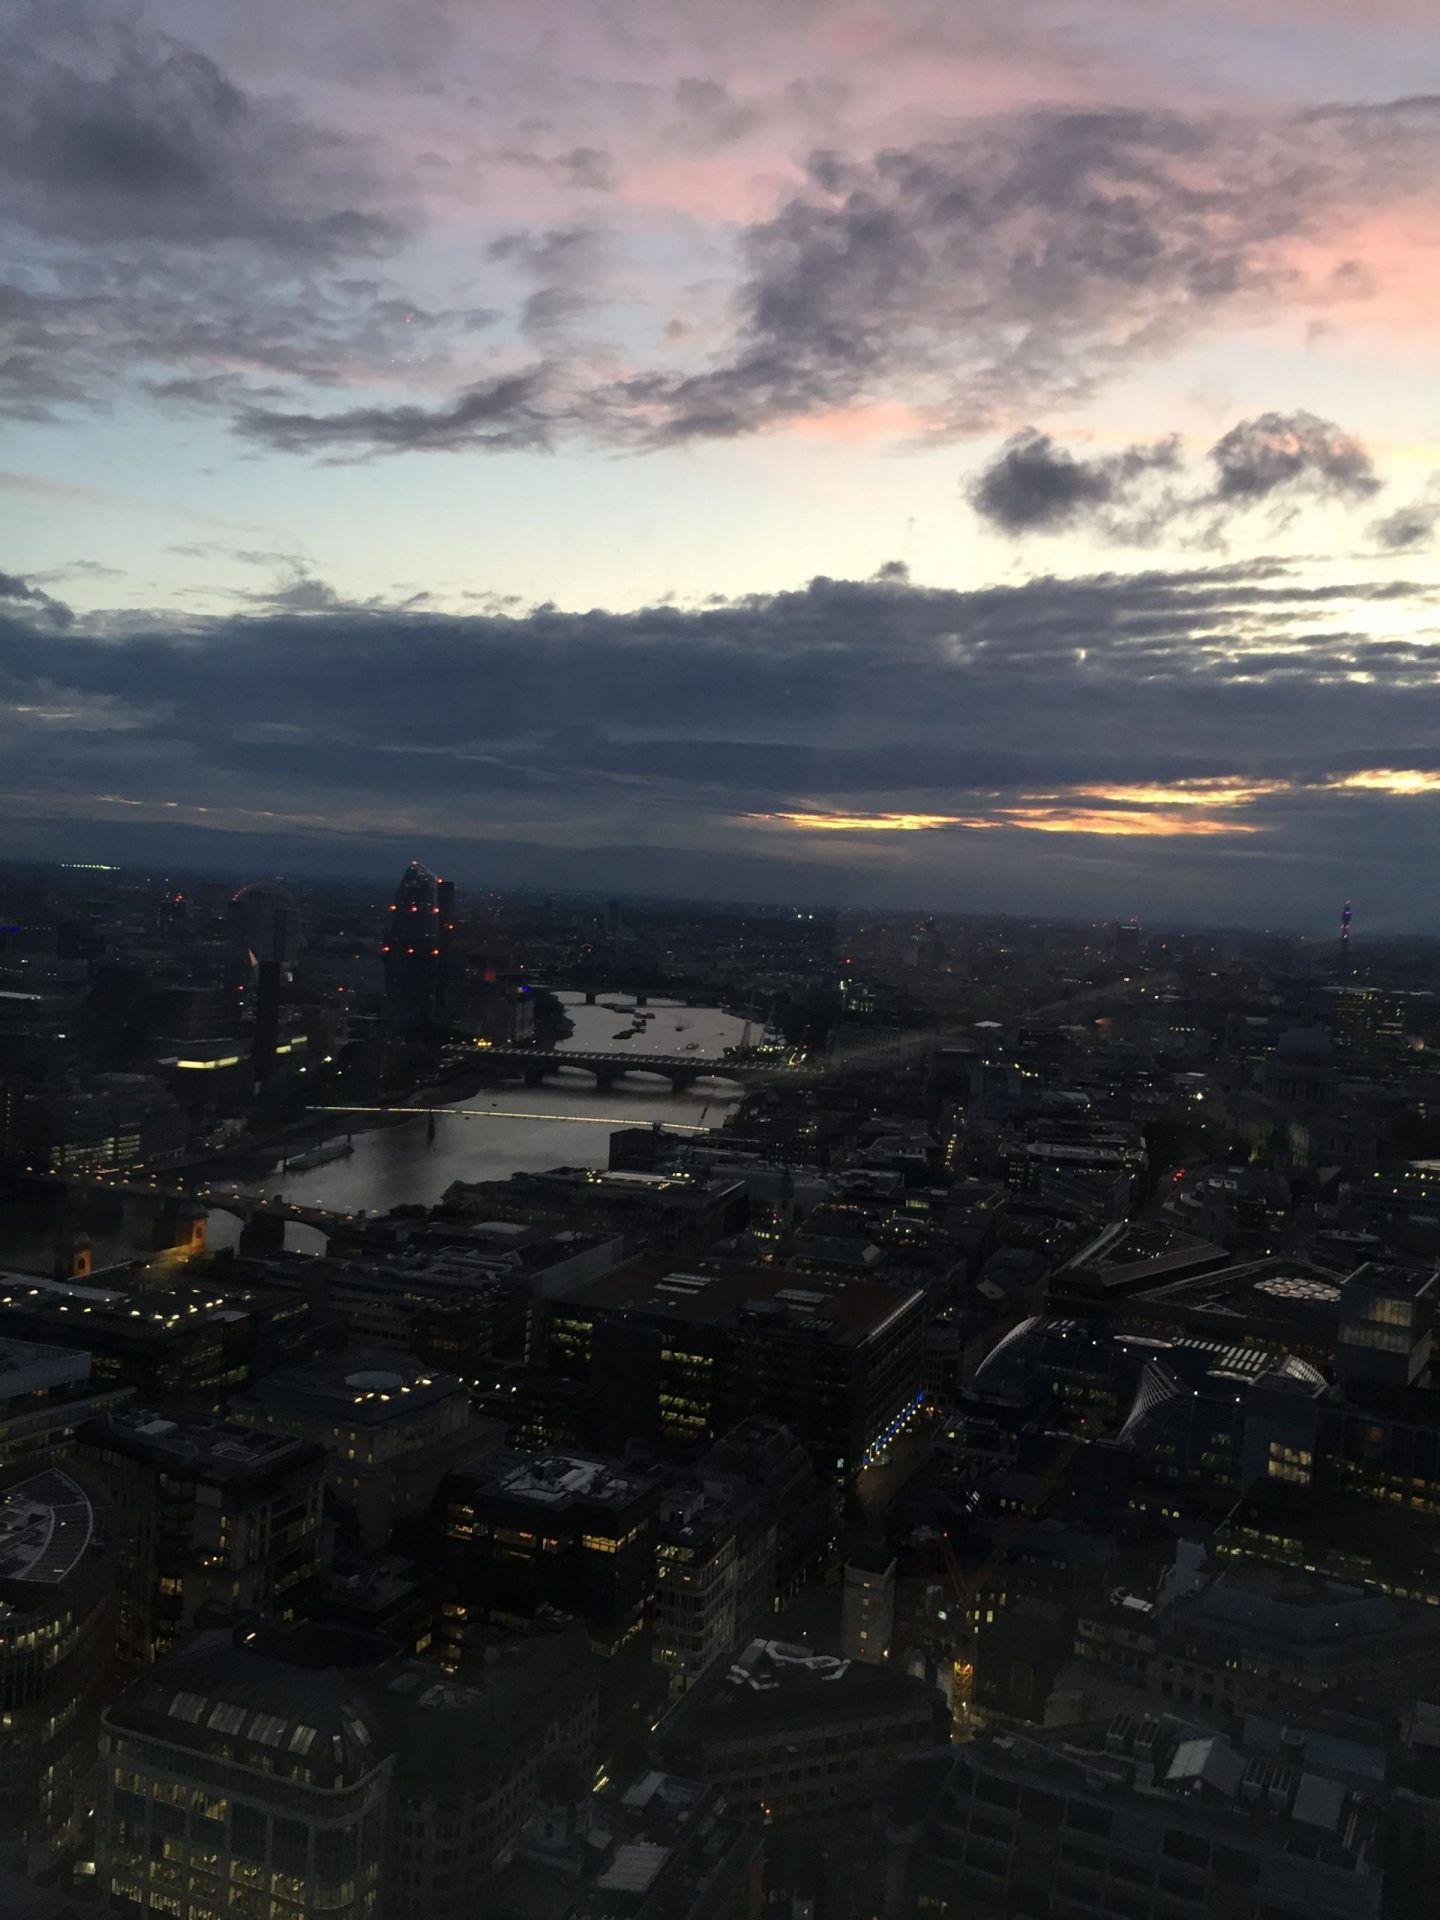 Things to do in London: visit Sky Garden